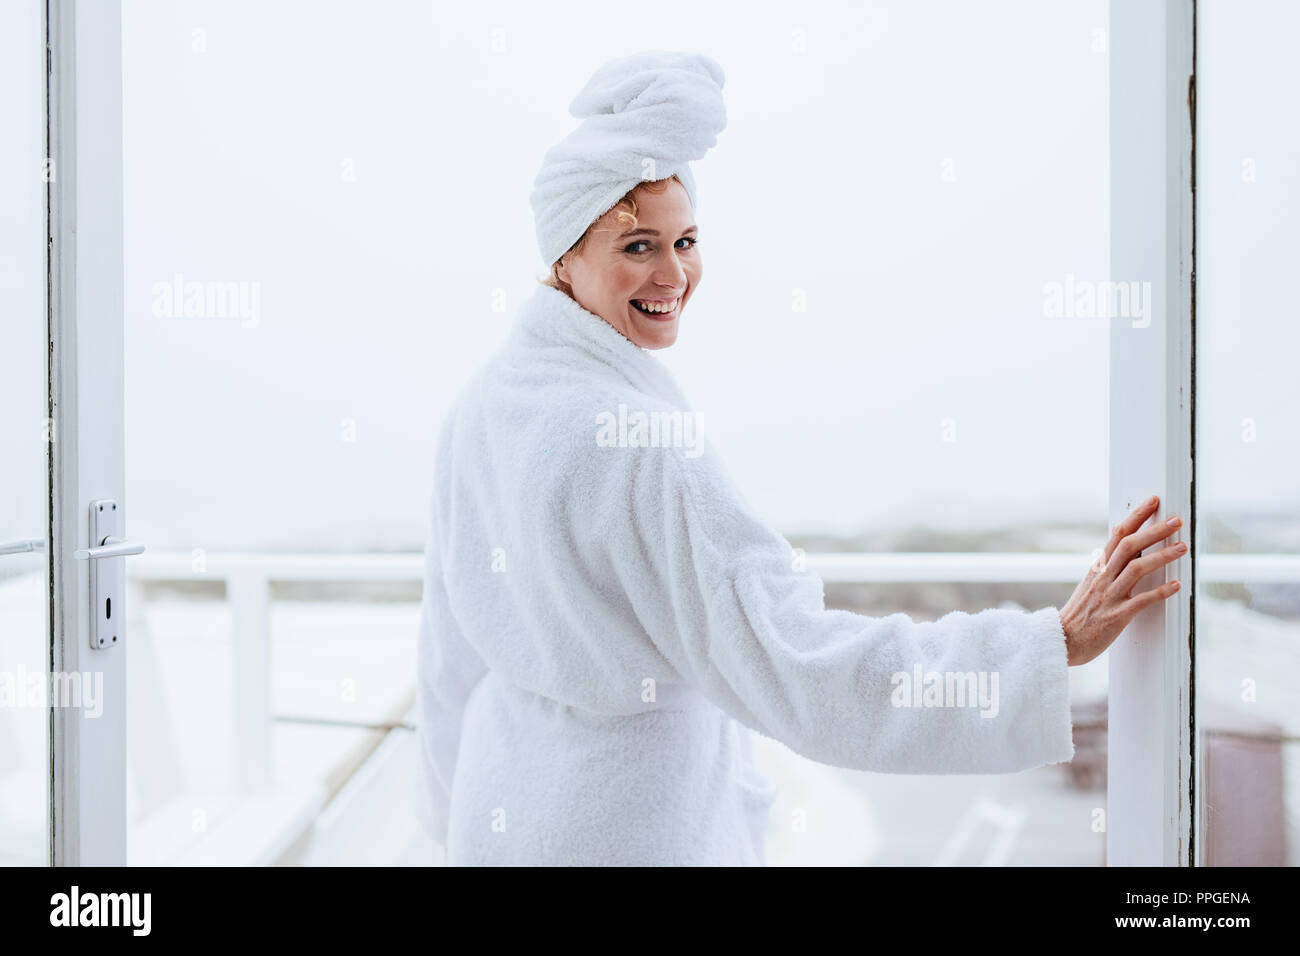 https://c8.alamy.com/comp/PPGENA/smiling-woman-in-a-bathrobe-with-a-towel-wrapped-on-head-rear-view-of-a-woman-standing-in-balcony-after-her-bath-PPGENA.jpg